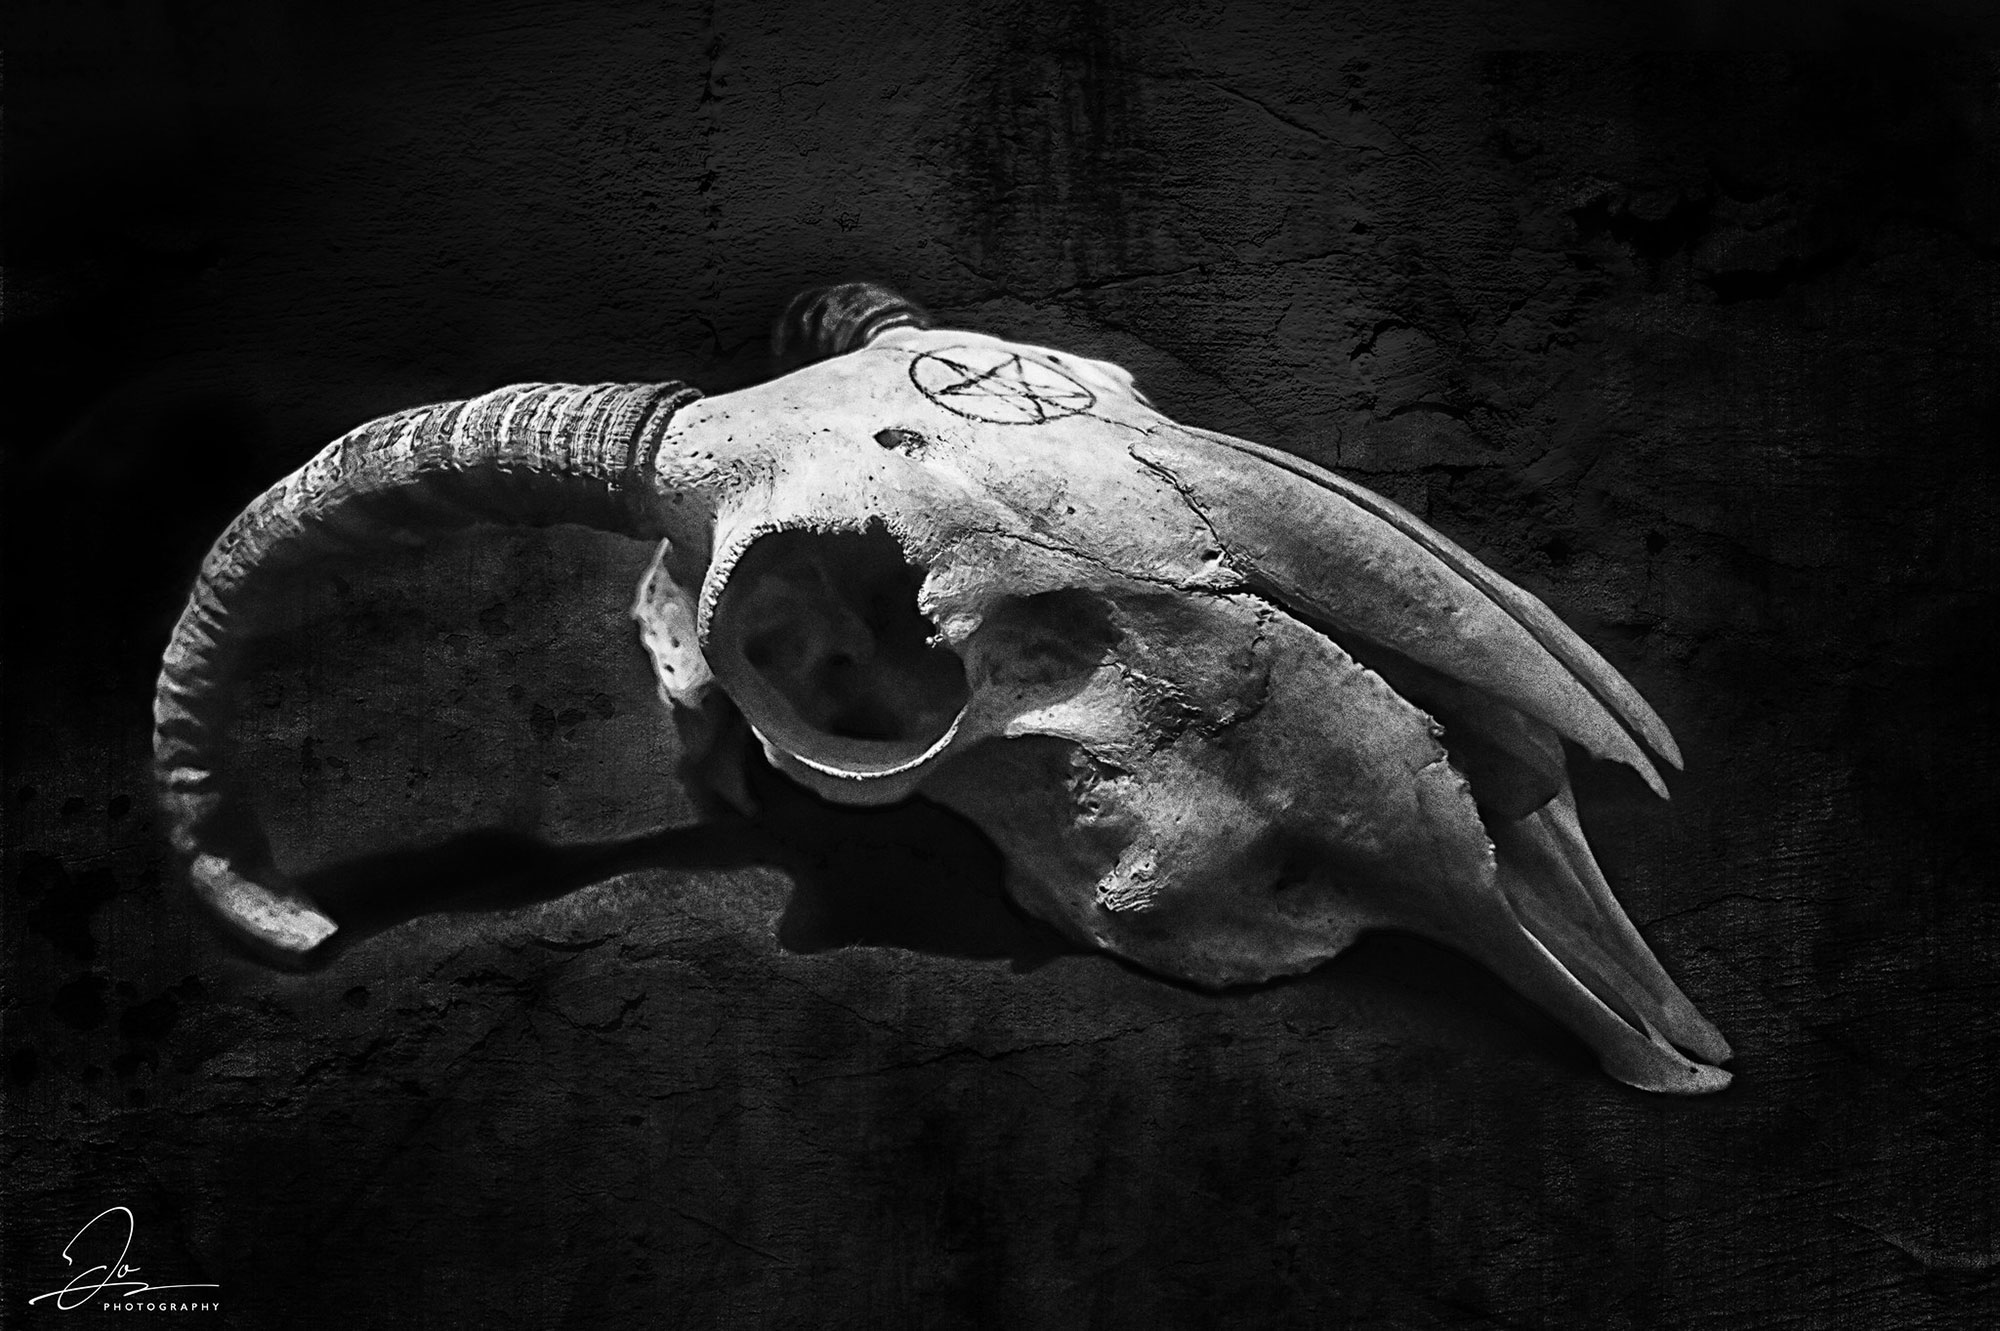 Skull Photographic study with textures